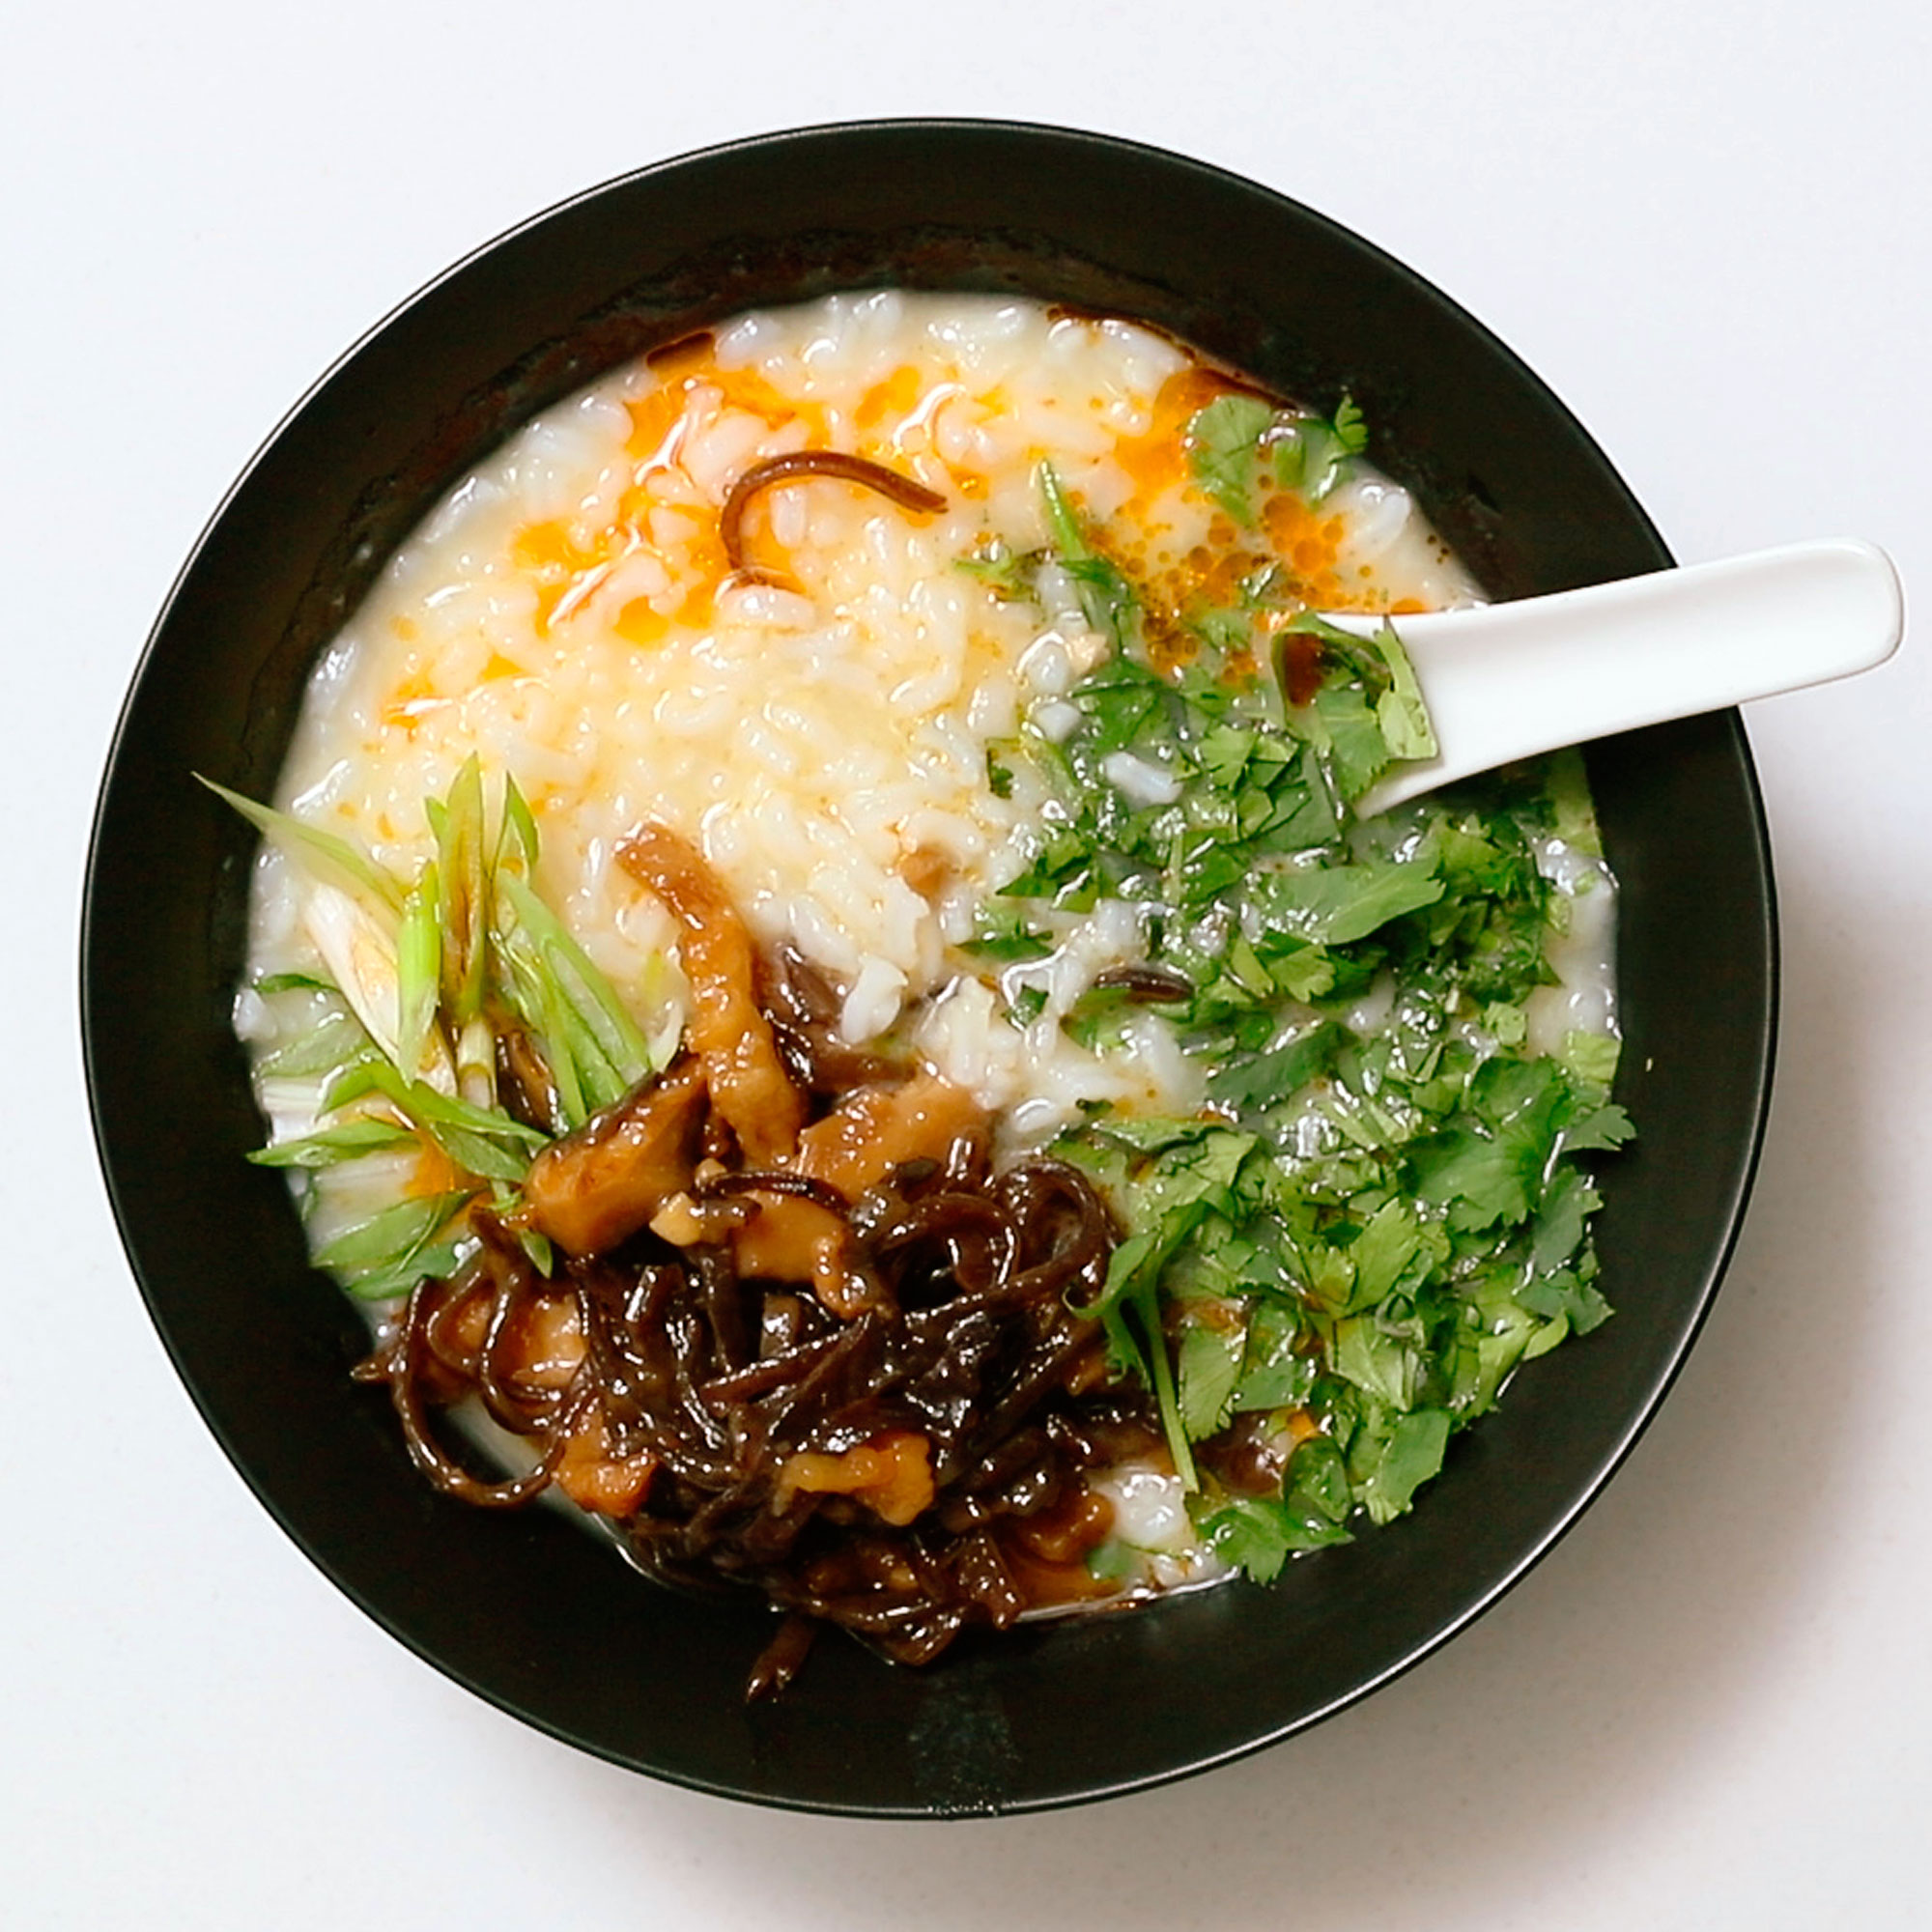 How to Make Pork Congee with Leftover Take-out Rice